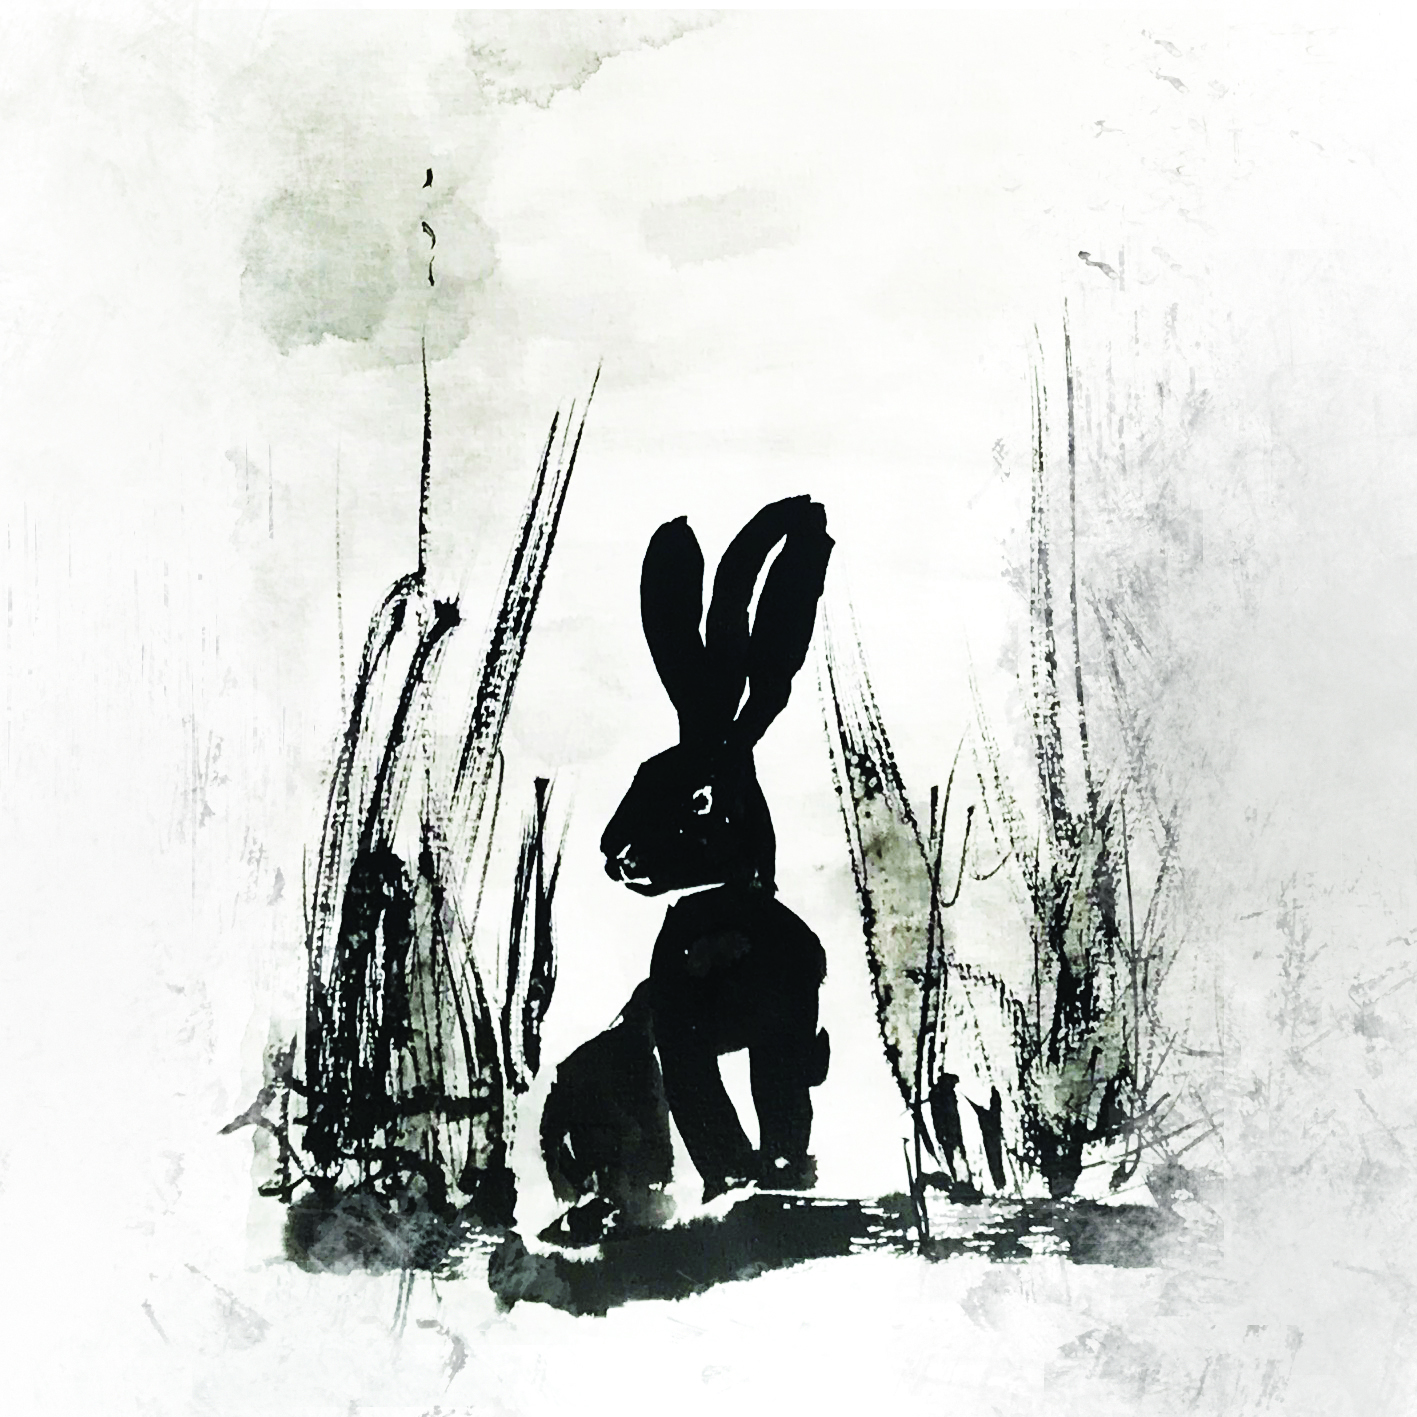 Image shows a charcoal drawing of a bunny sitting amongst foilage.